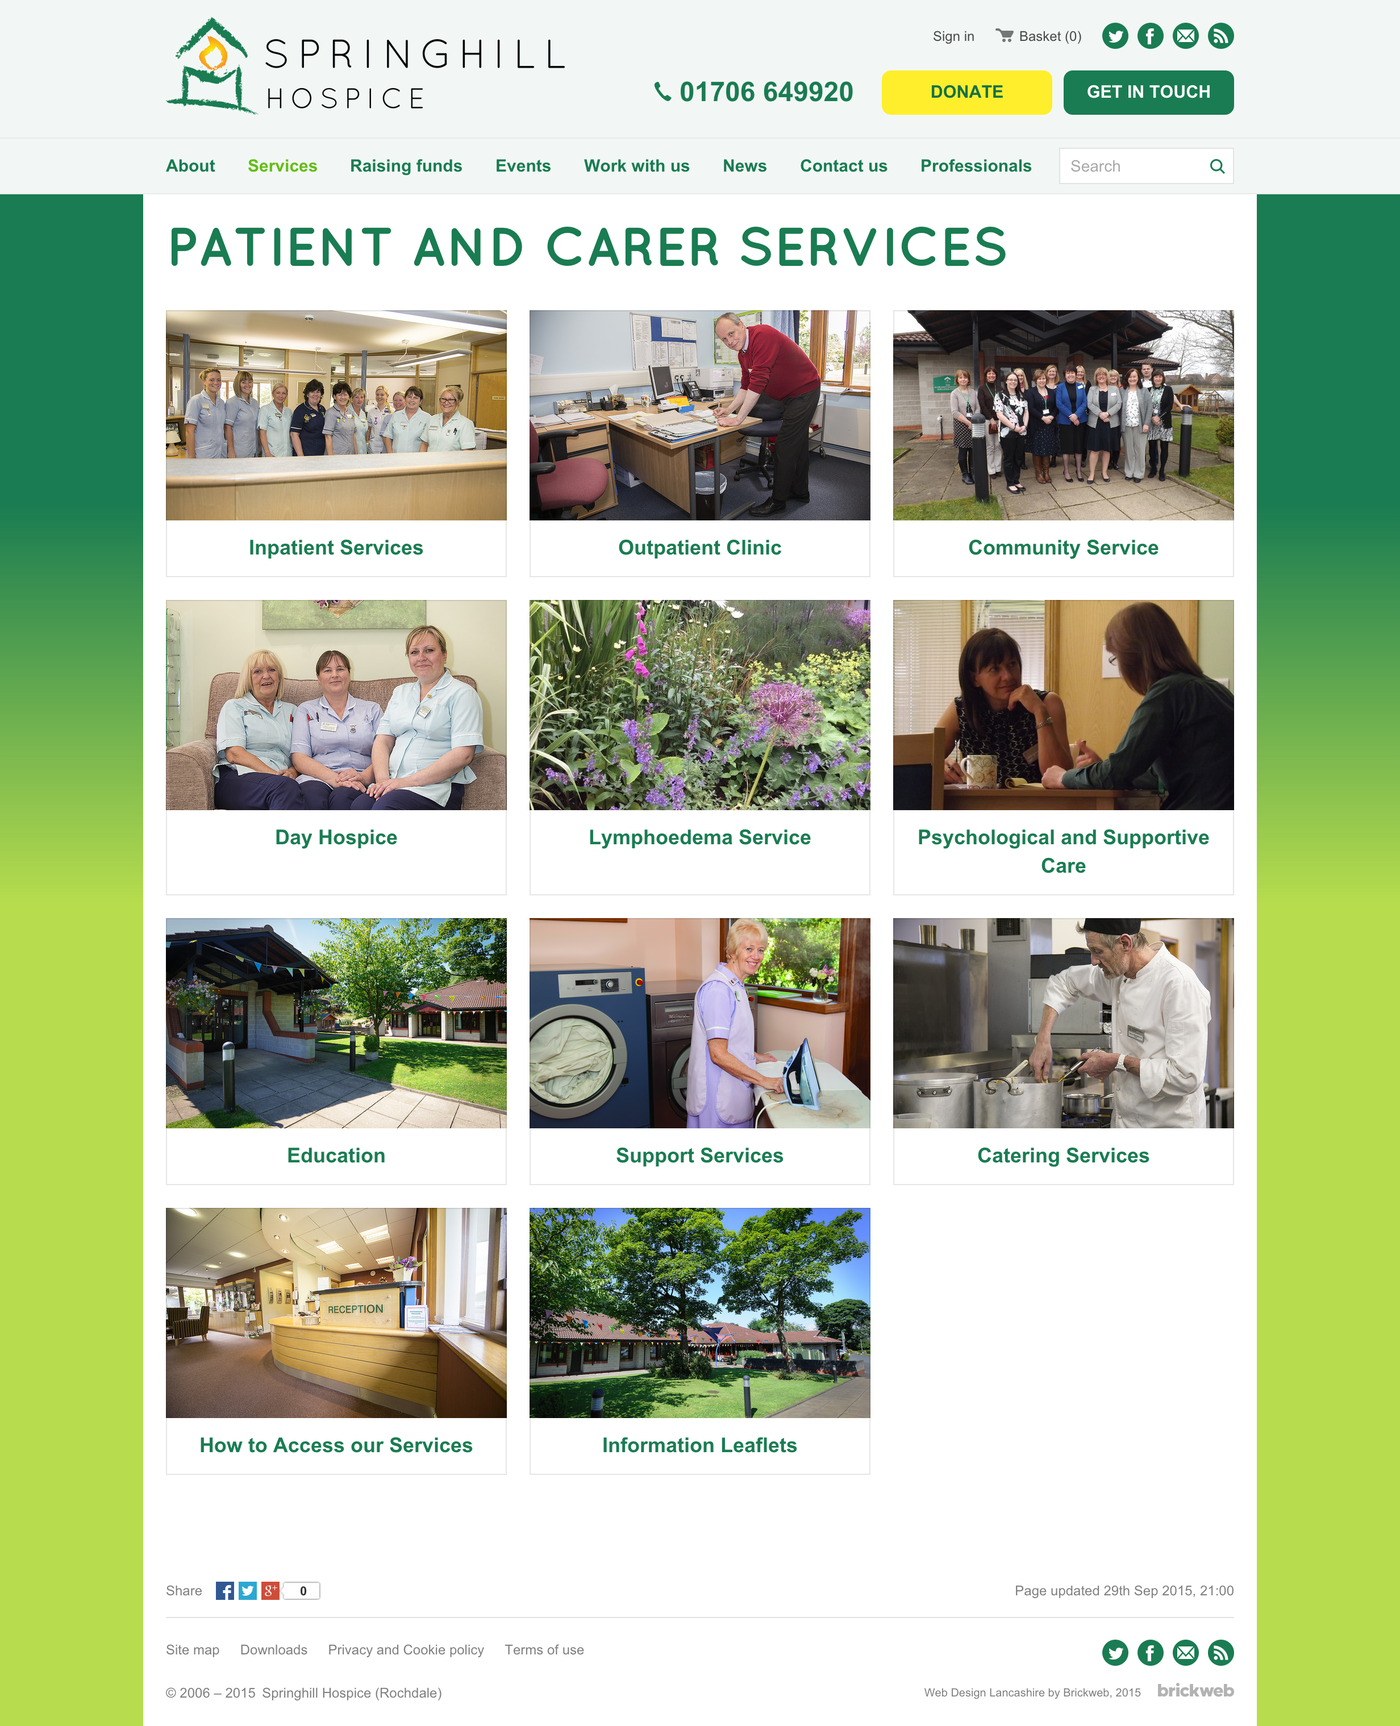 Springhill Hospice Services